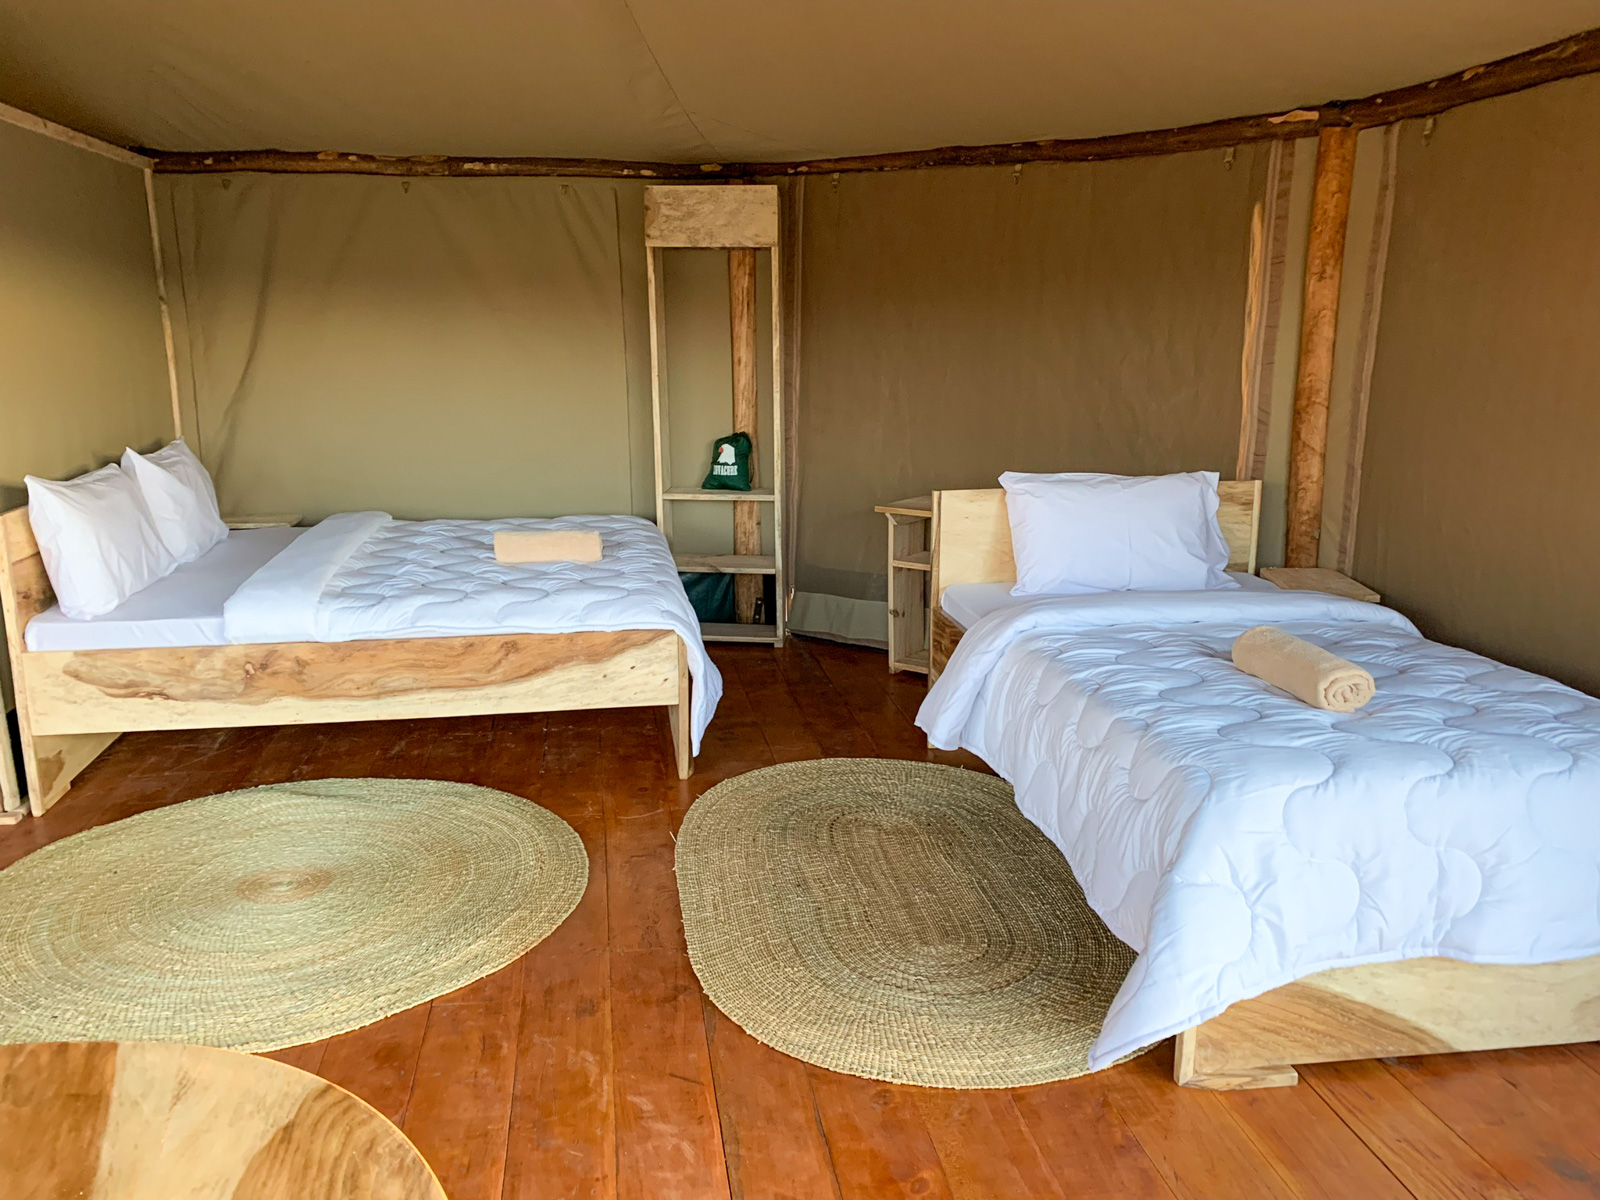 Foresight Ecolodge & Safari – Sleeping Room in Family Tent